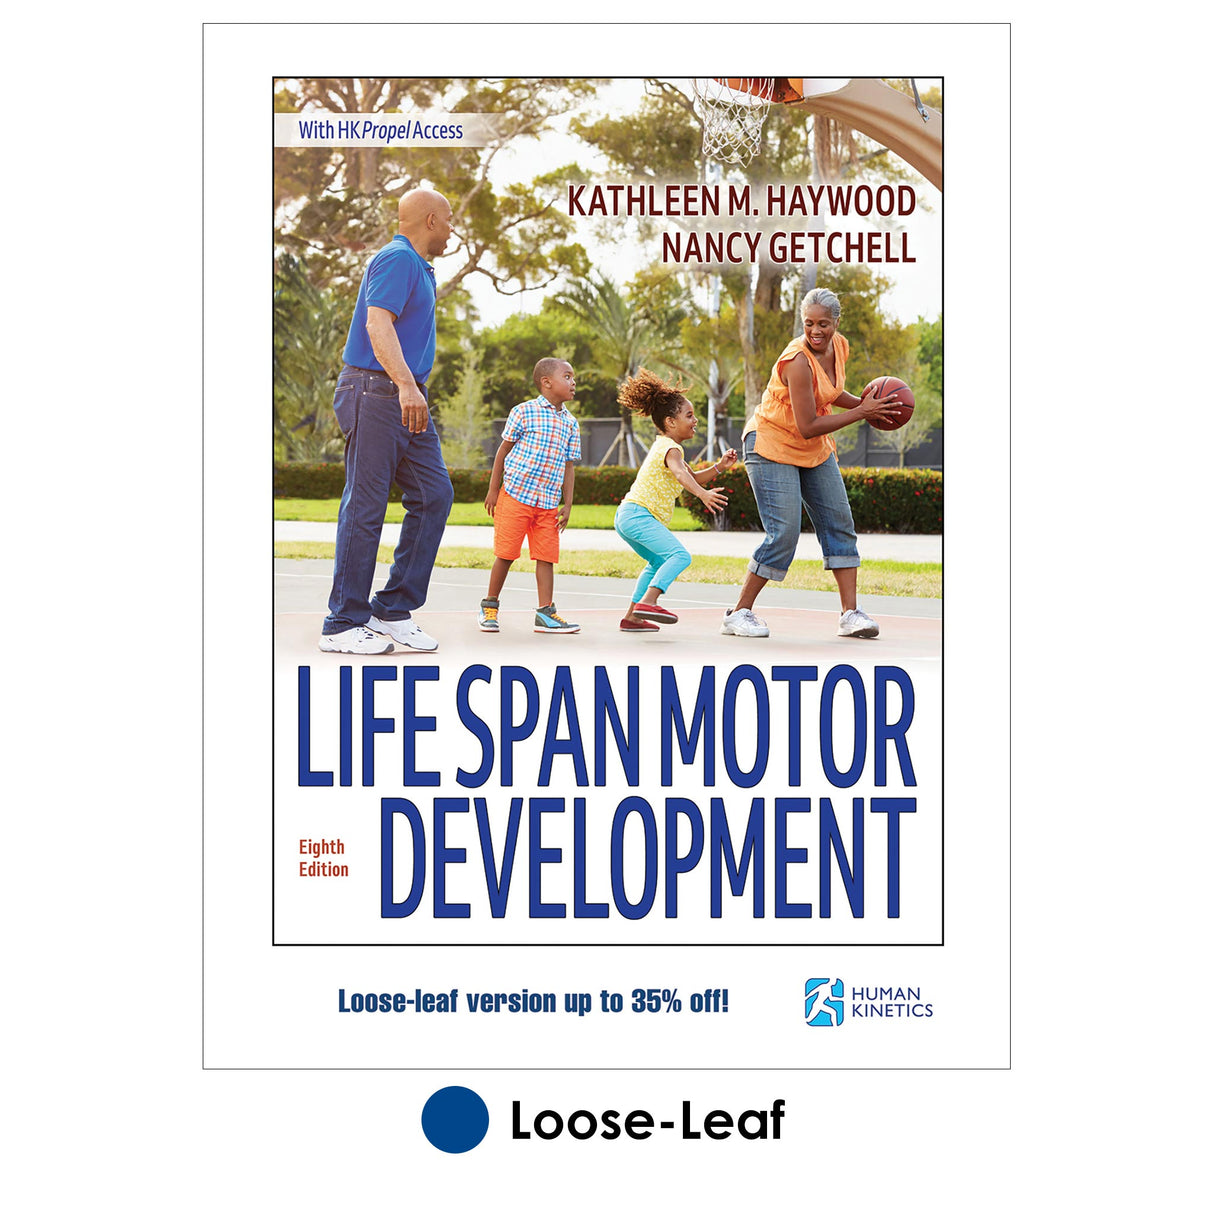 Life Span Motor Development 8th Edition With HKPropel Access Loose-Leaf Edition